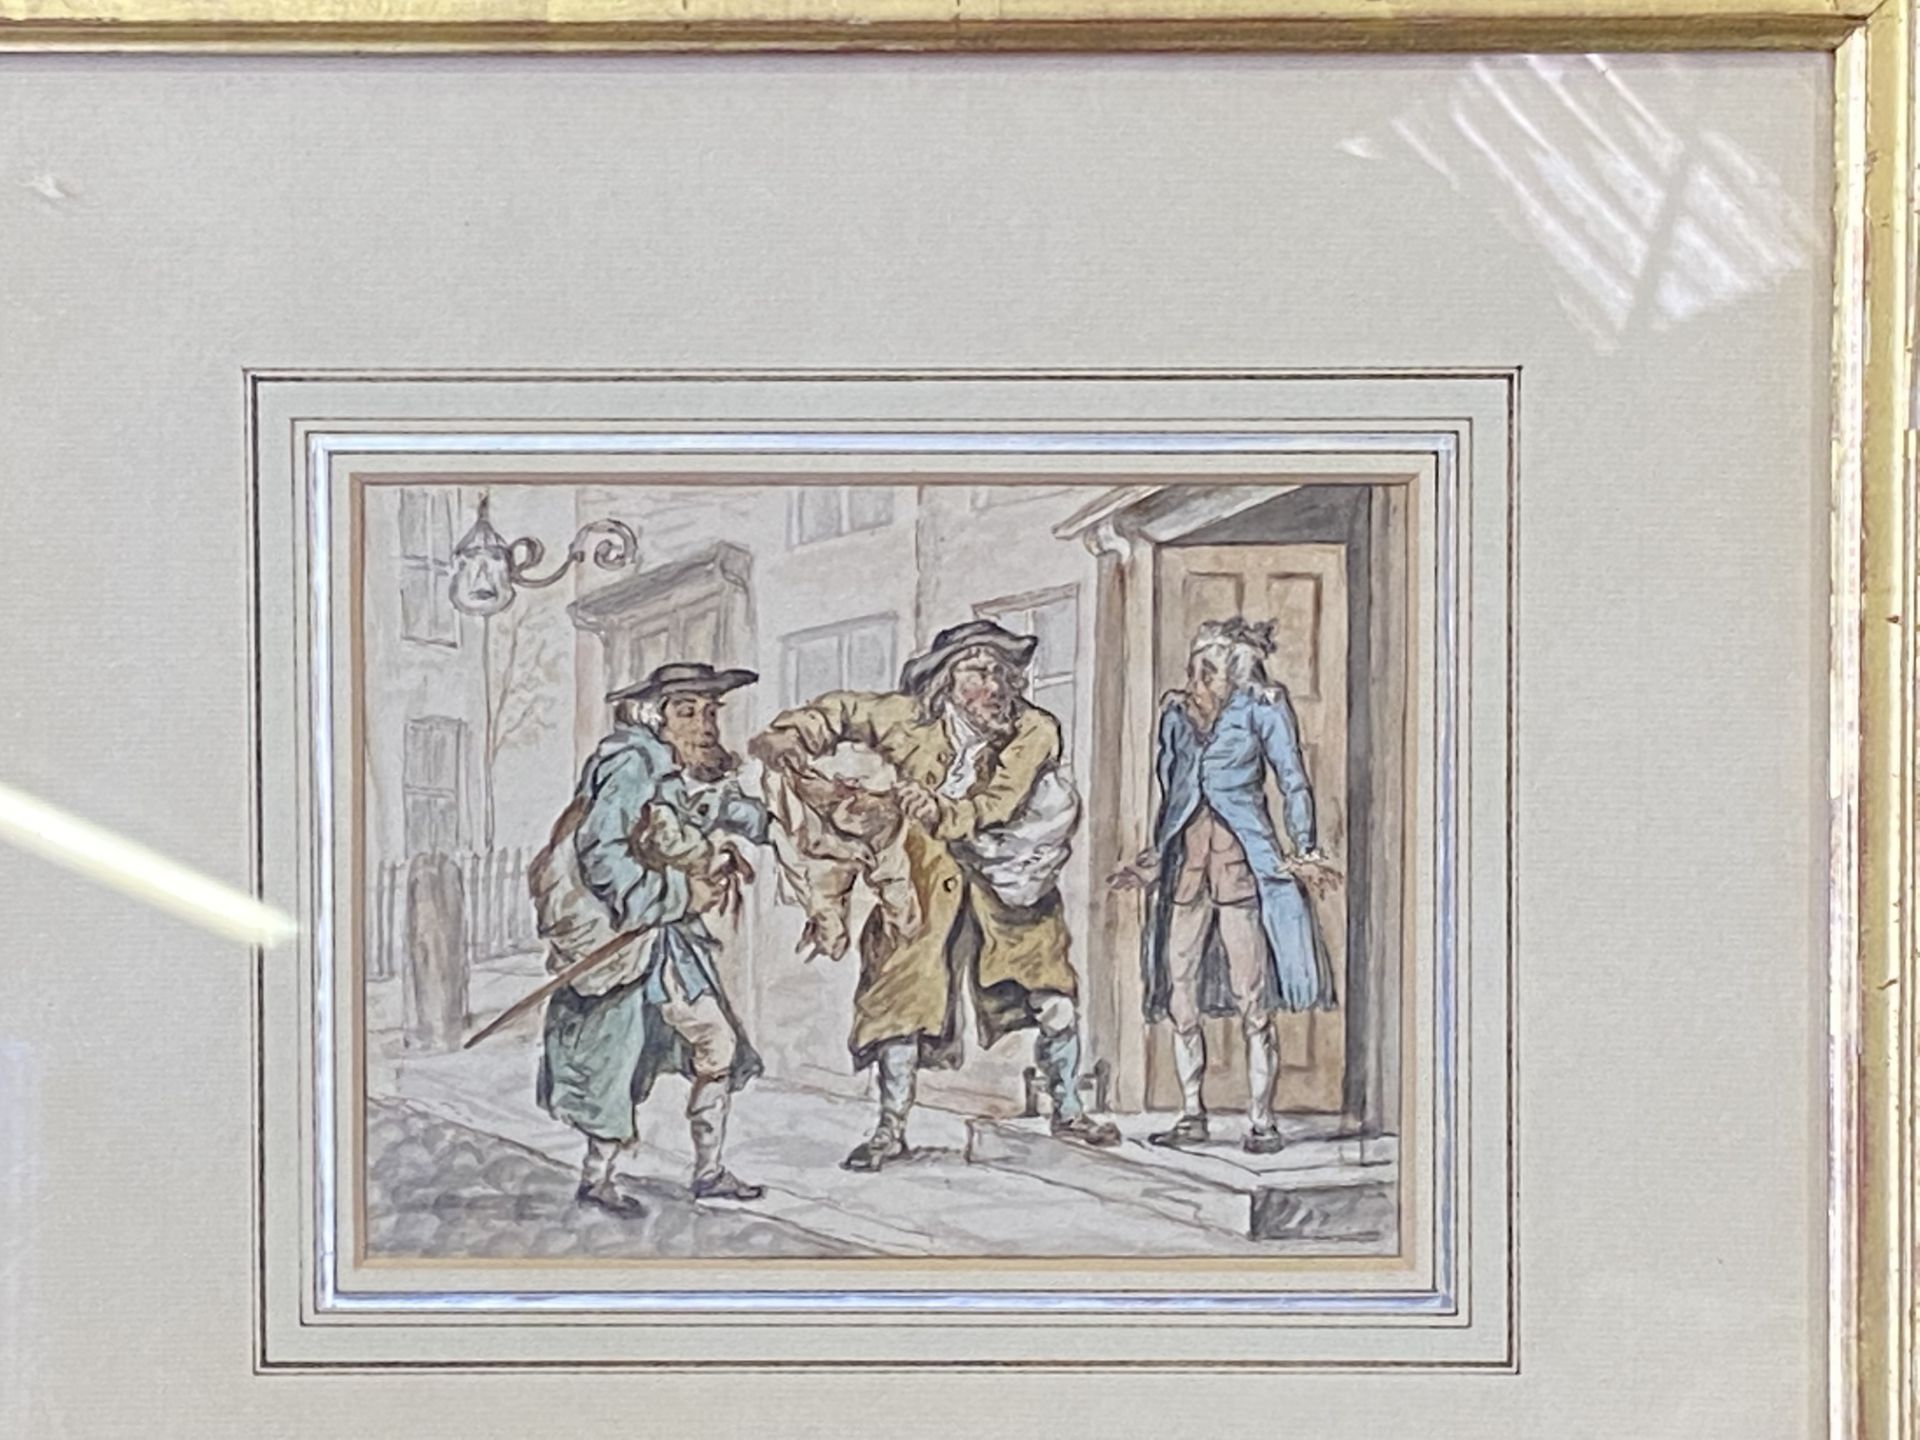 Framed and glazed watercolour, The Old Clothes Dealers, Henry William Bunbury - Image 2 of 3